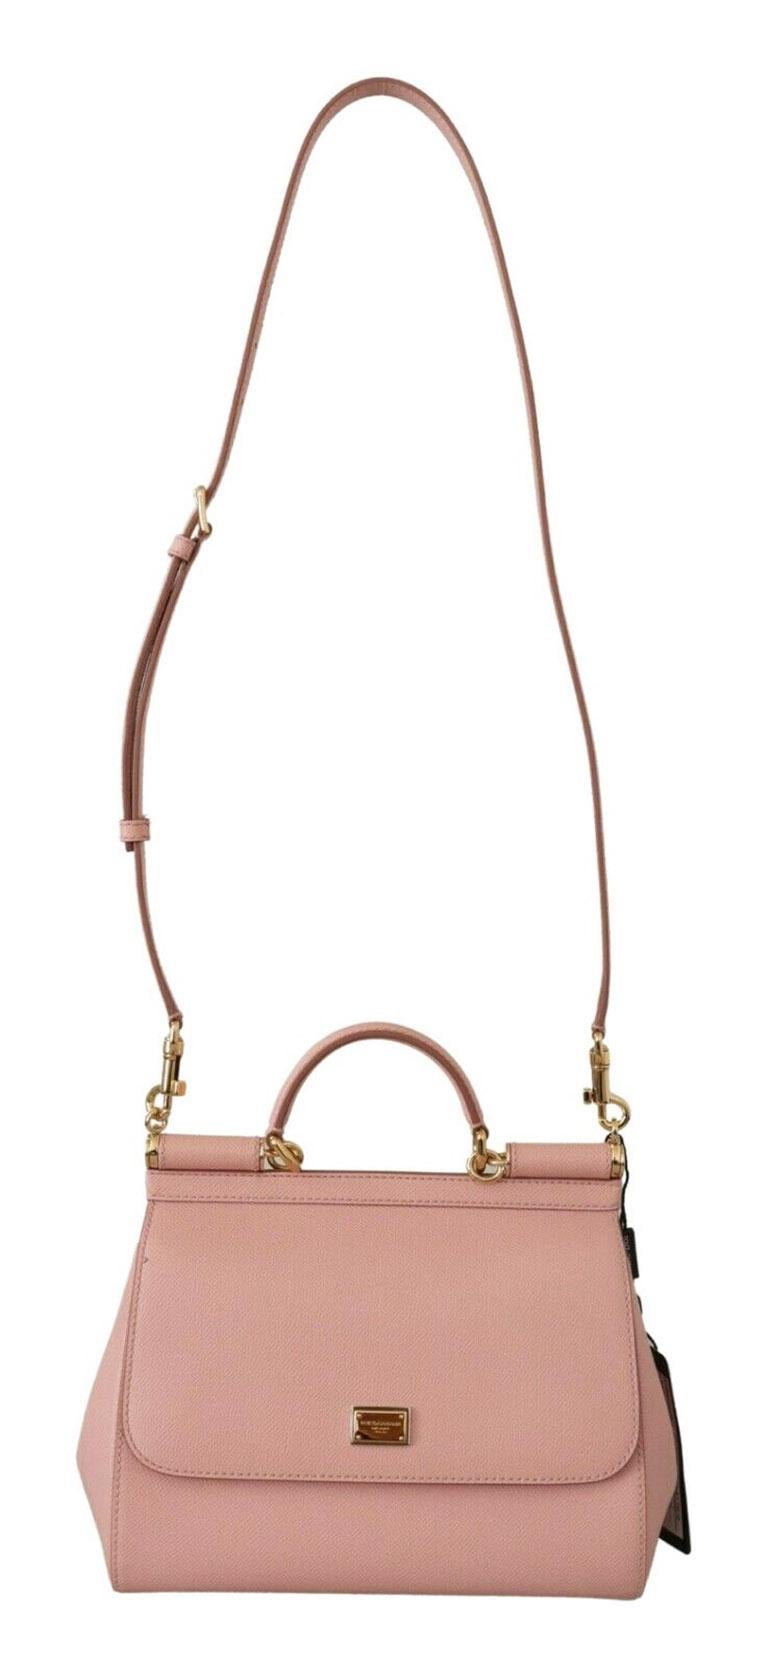 Gorgeous brand new with tags, 100% Authentic Dolce & Gabbana Women's Bag.

Model: SICILY

Material: 100% Leather

Color: Pink with gold metal detailing

Strap: One handle, detachable and adjustable shoulder strap

Magnetic flap closure

One inside